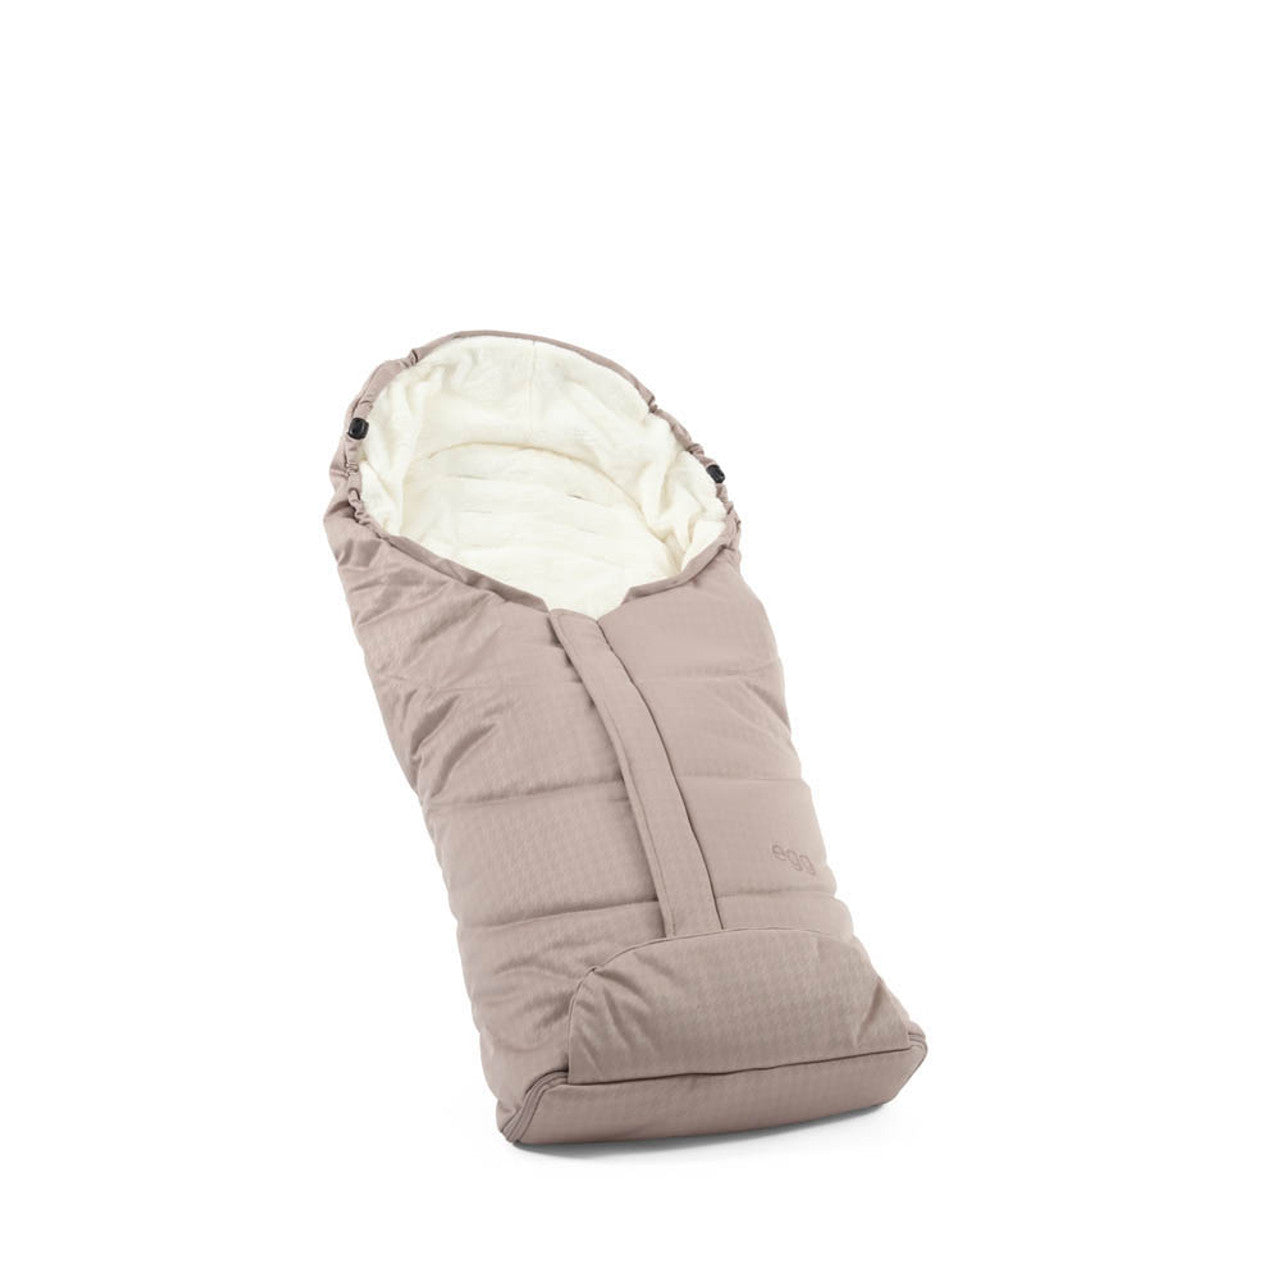 Egg® 3 Footmuff - Houndstooth Almond -  | For Your Little One